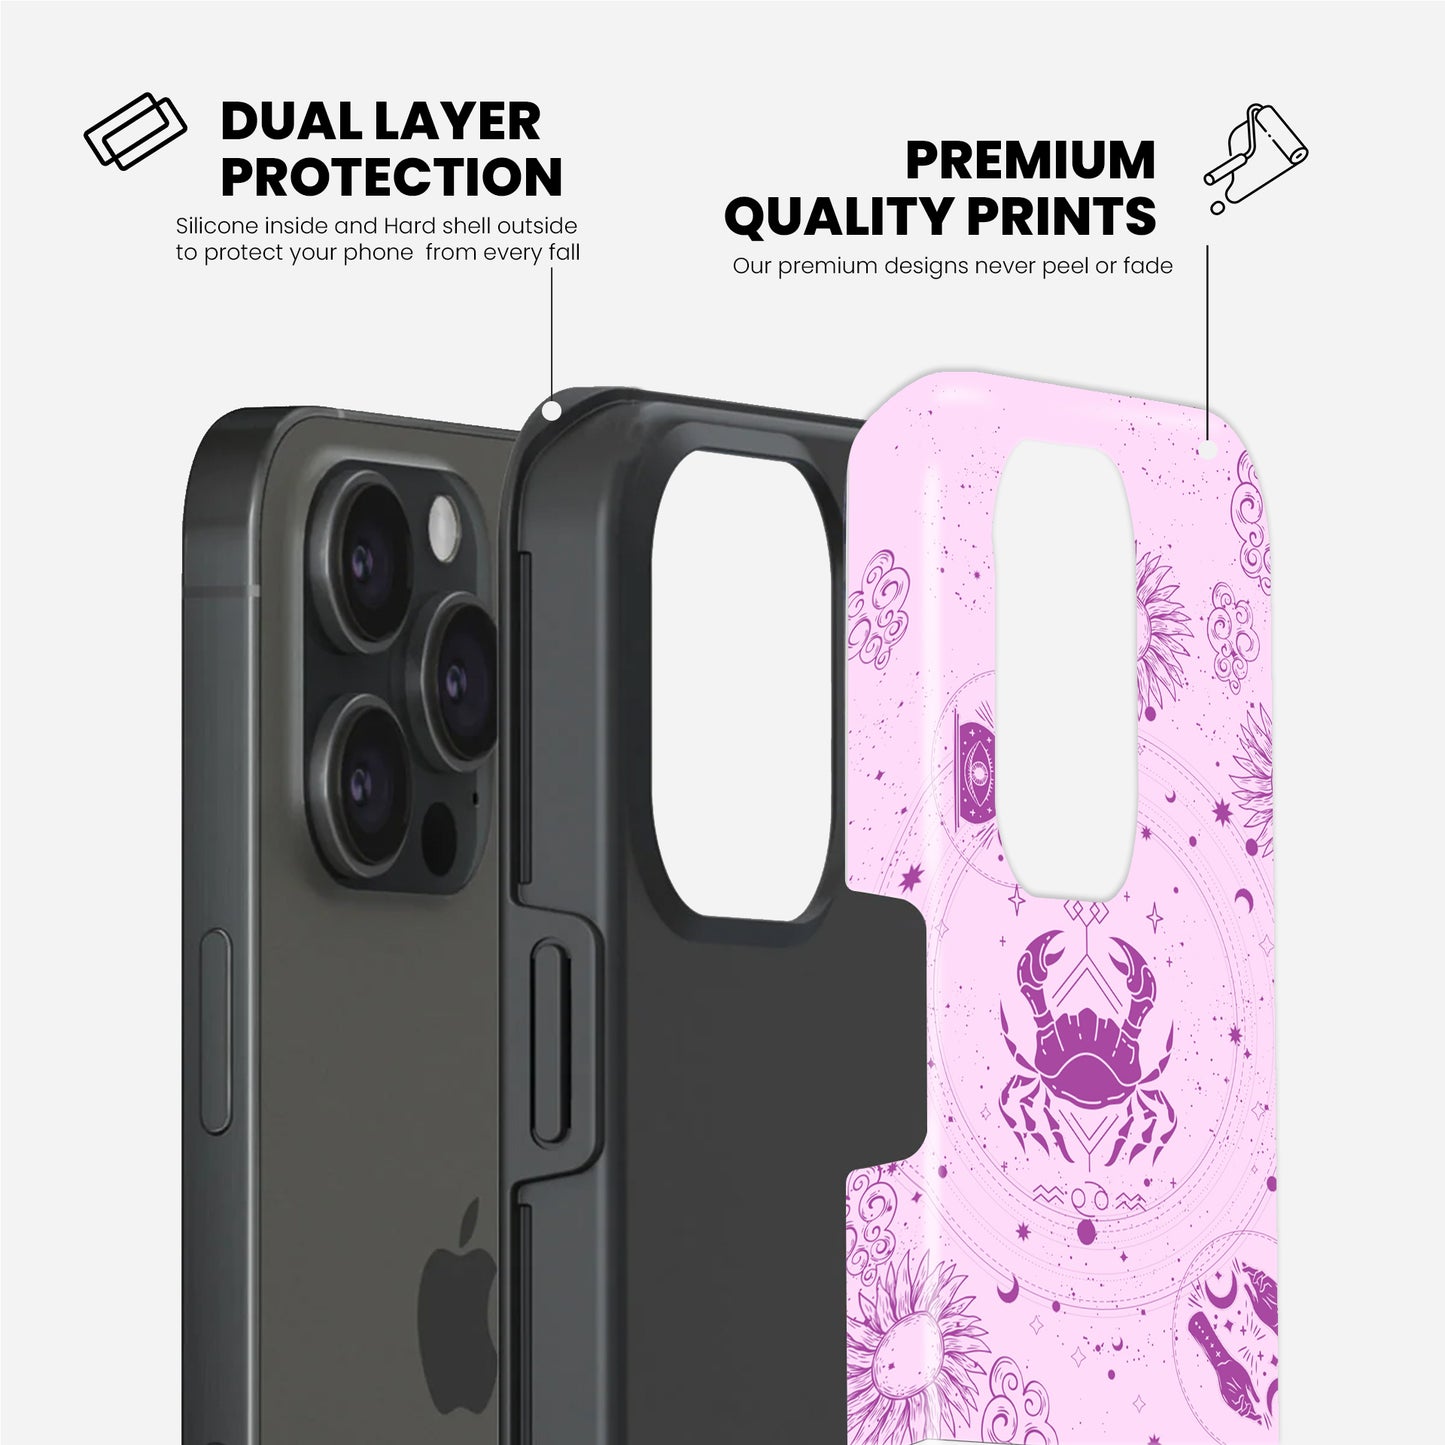 Cancer - Pink iPhone Case